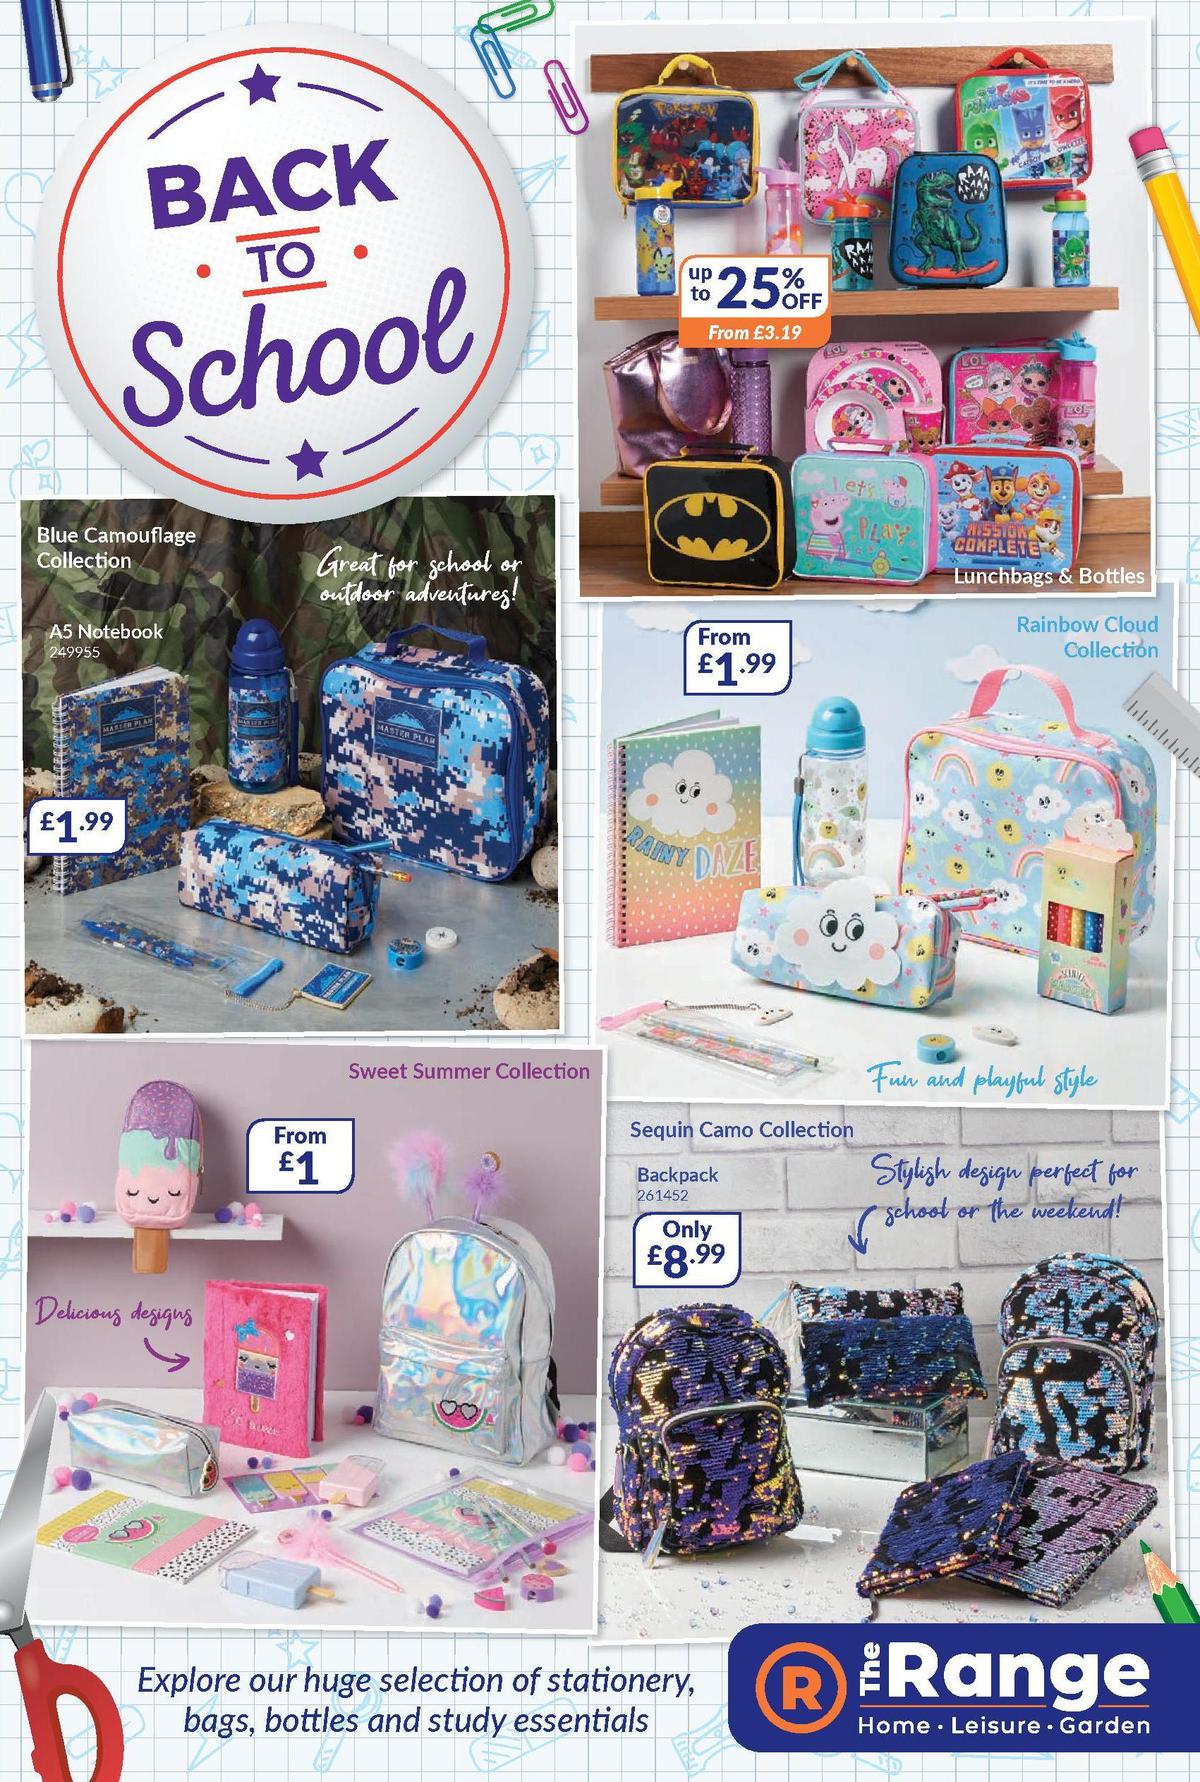 The Range Collage Days Offers from 1 August